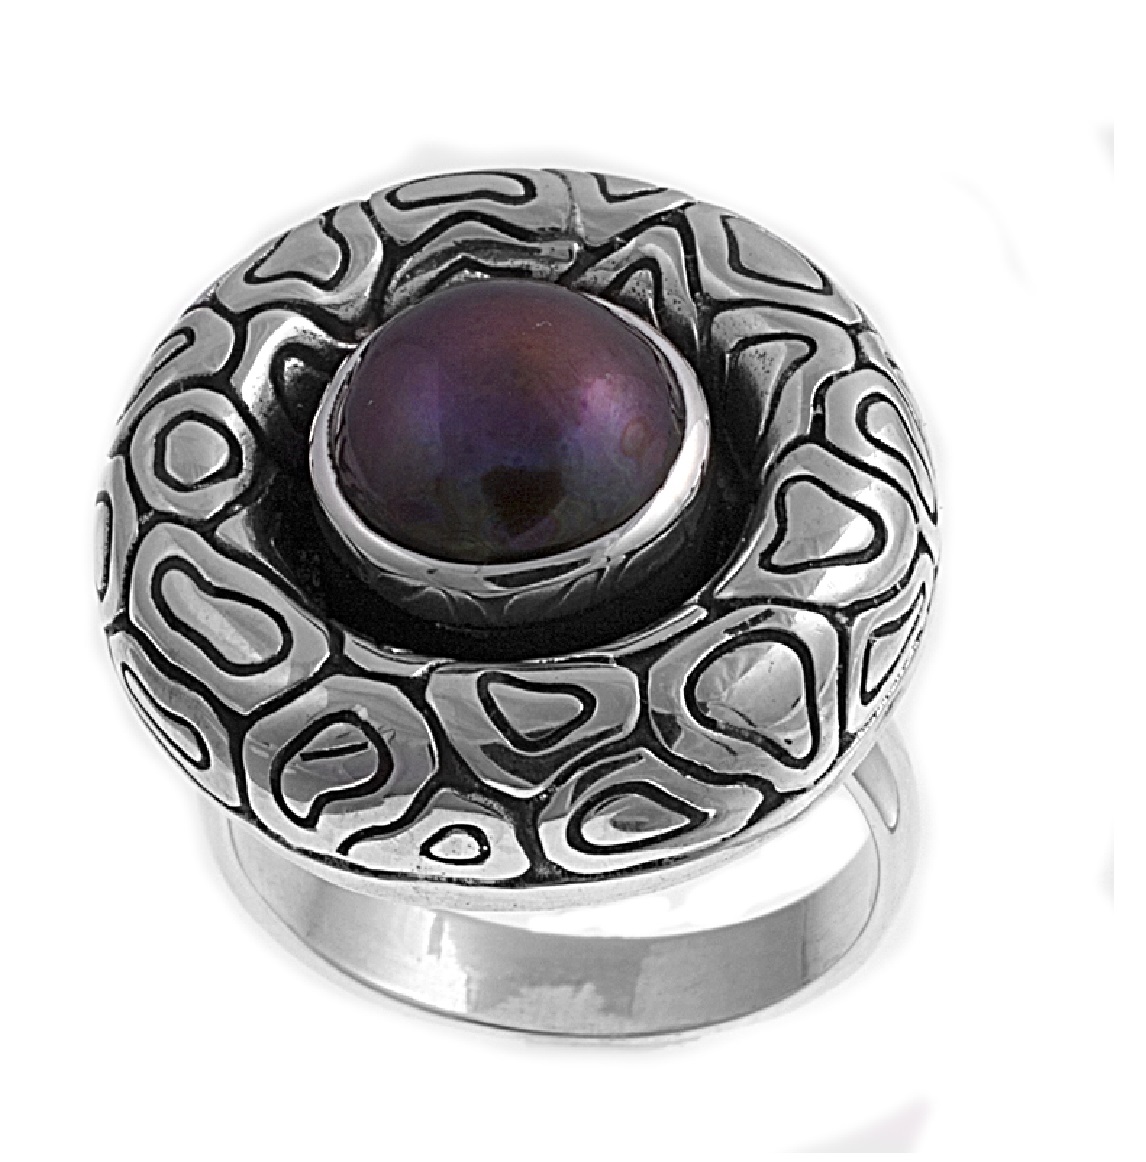 AllinStock Round Simulated Mabe Stone Filigree Ring Sterling Silver 